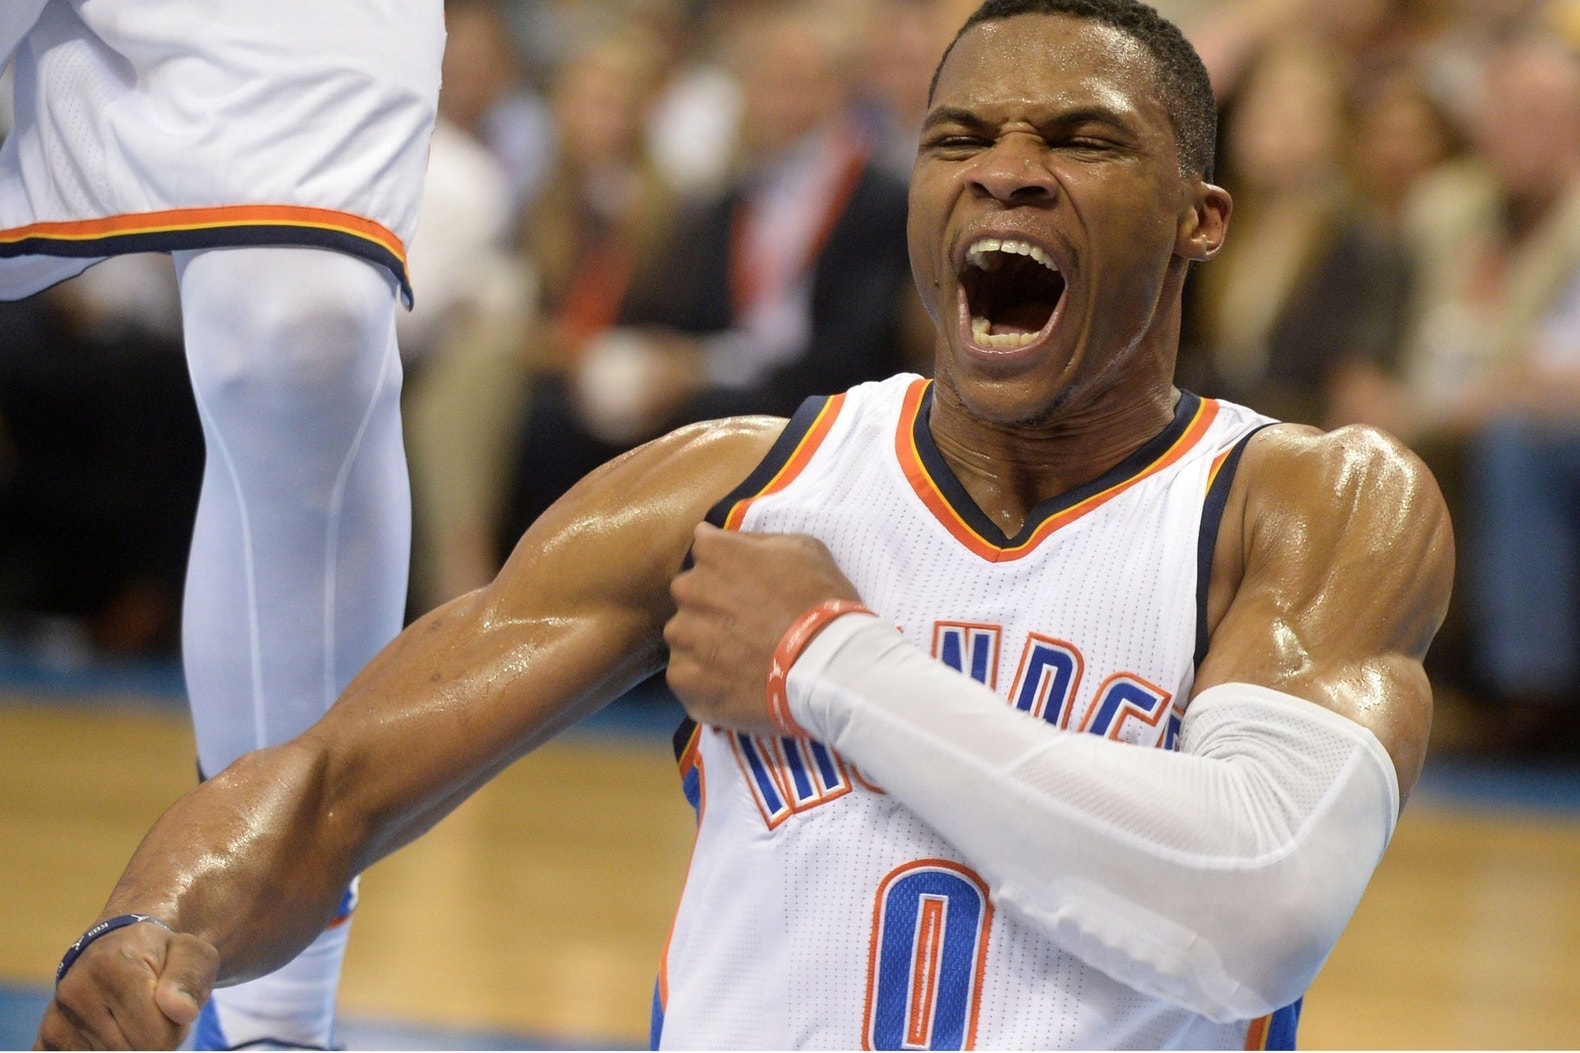 Nike CEO Mark Parker Confirms Russell Westbrook Giannis Antetokounmpo Signature Shoes Nike Basketball Air Jordan Brand